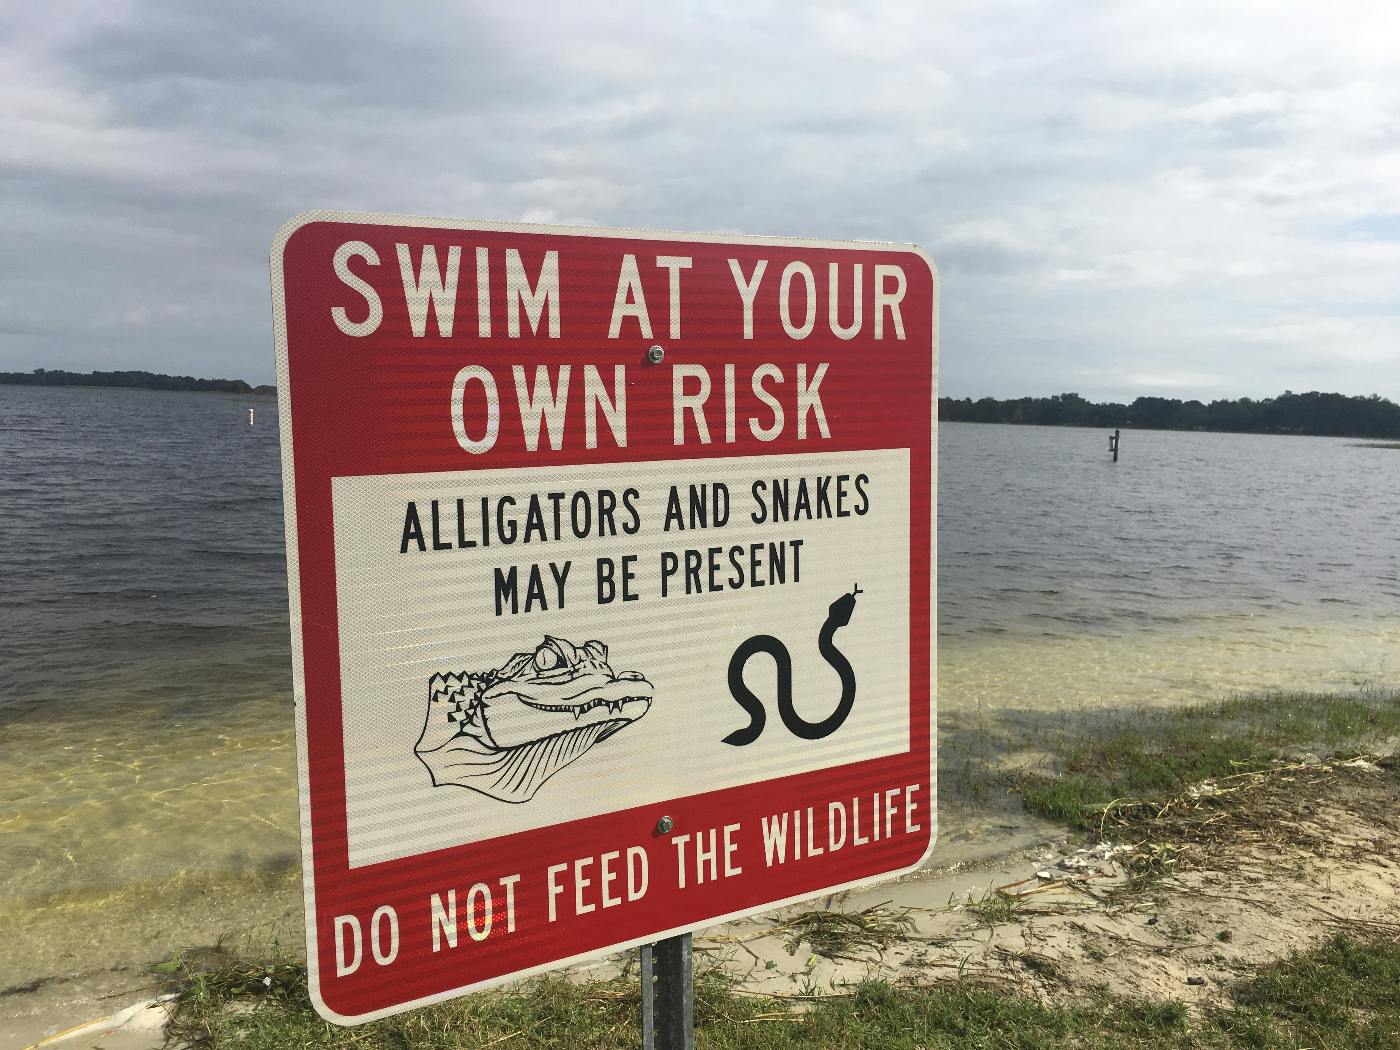 sign: Swim at your own risk, Alligators and snakes may be present, do not feed the wildlife